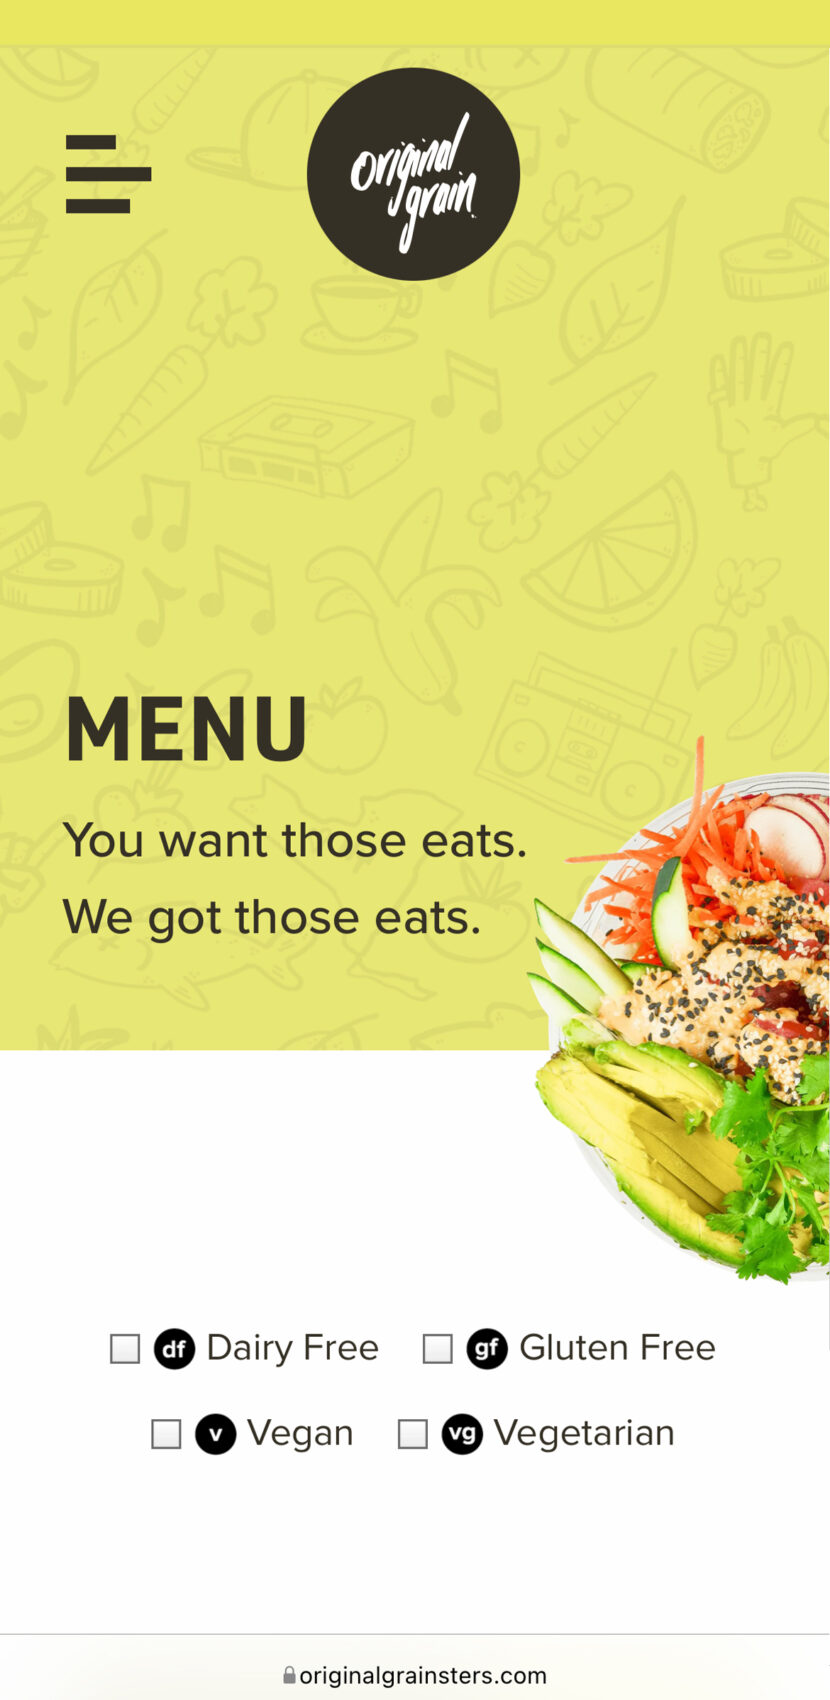 Original Grain's responsive and dynamic menu page shown on a mobile mockup